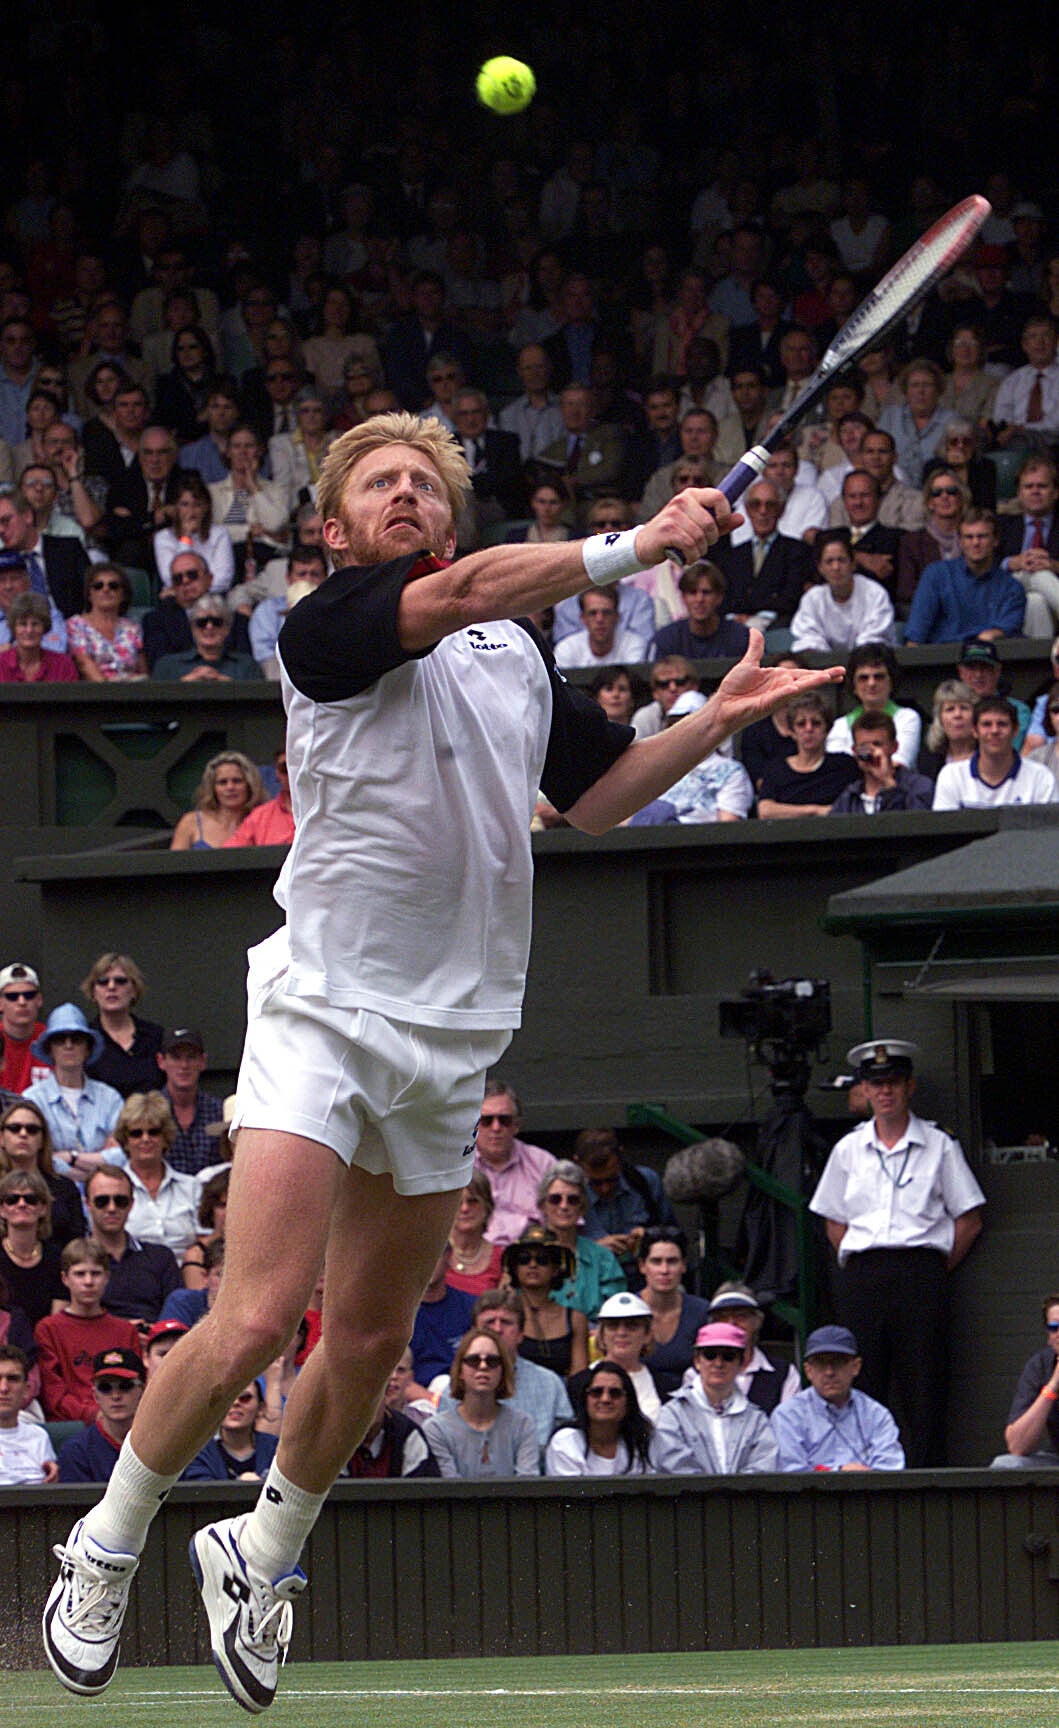 Becker in action against Patrick Rafter during the 1999 Wimbledon tennis Championships. Rafter defeated Becker 6-3 6-2 6-3 (PA)